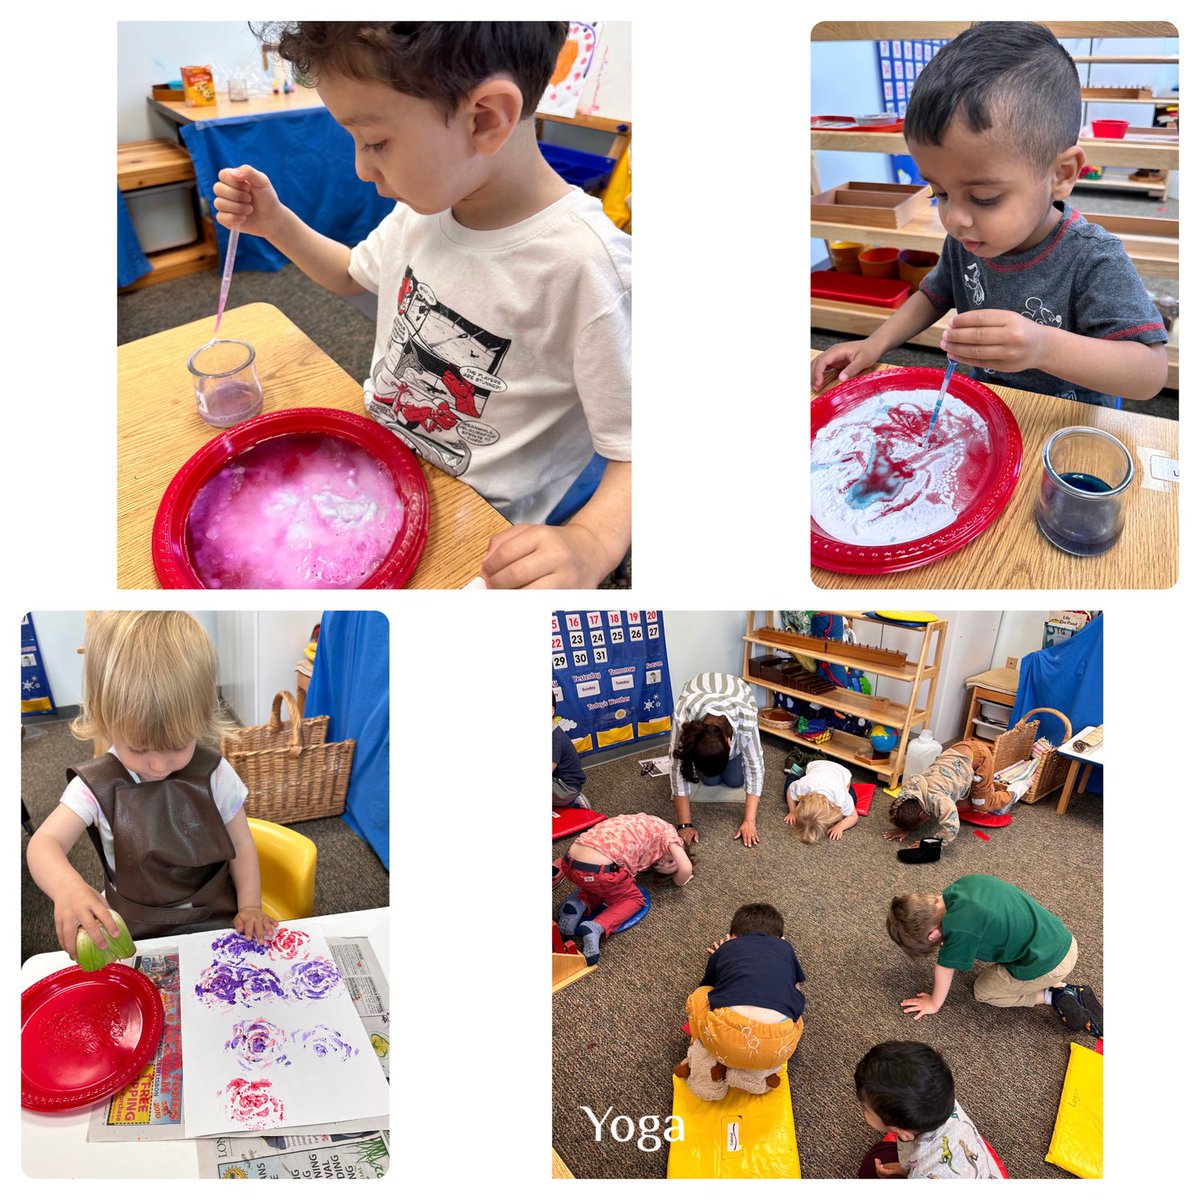 Paint Branch Montessori School 

Join our School Community as we celebrate the end of the School Year and the start of our Summer Program on June 12th.

Very, very, limited enrollments available for 2-6 year old students. 
Call us today: 301-434-0373